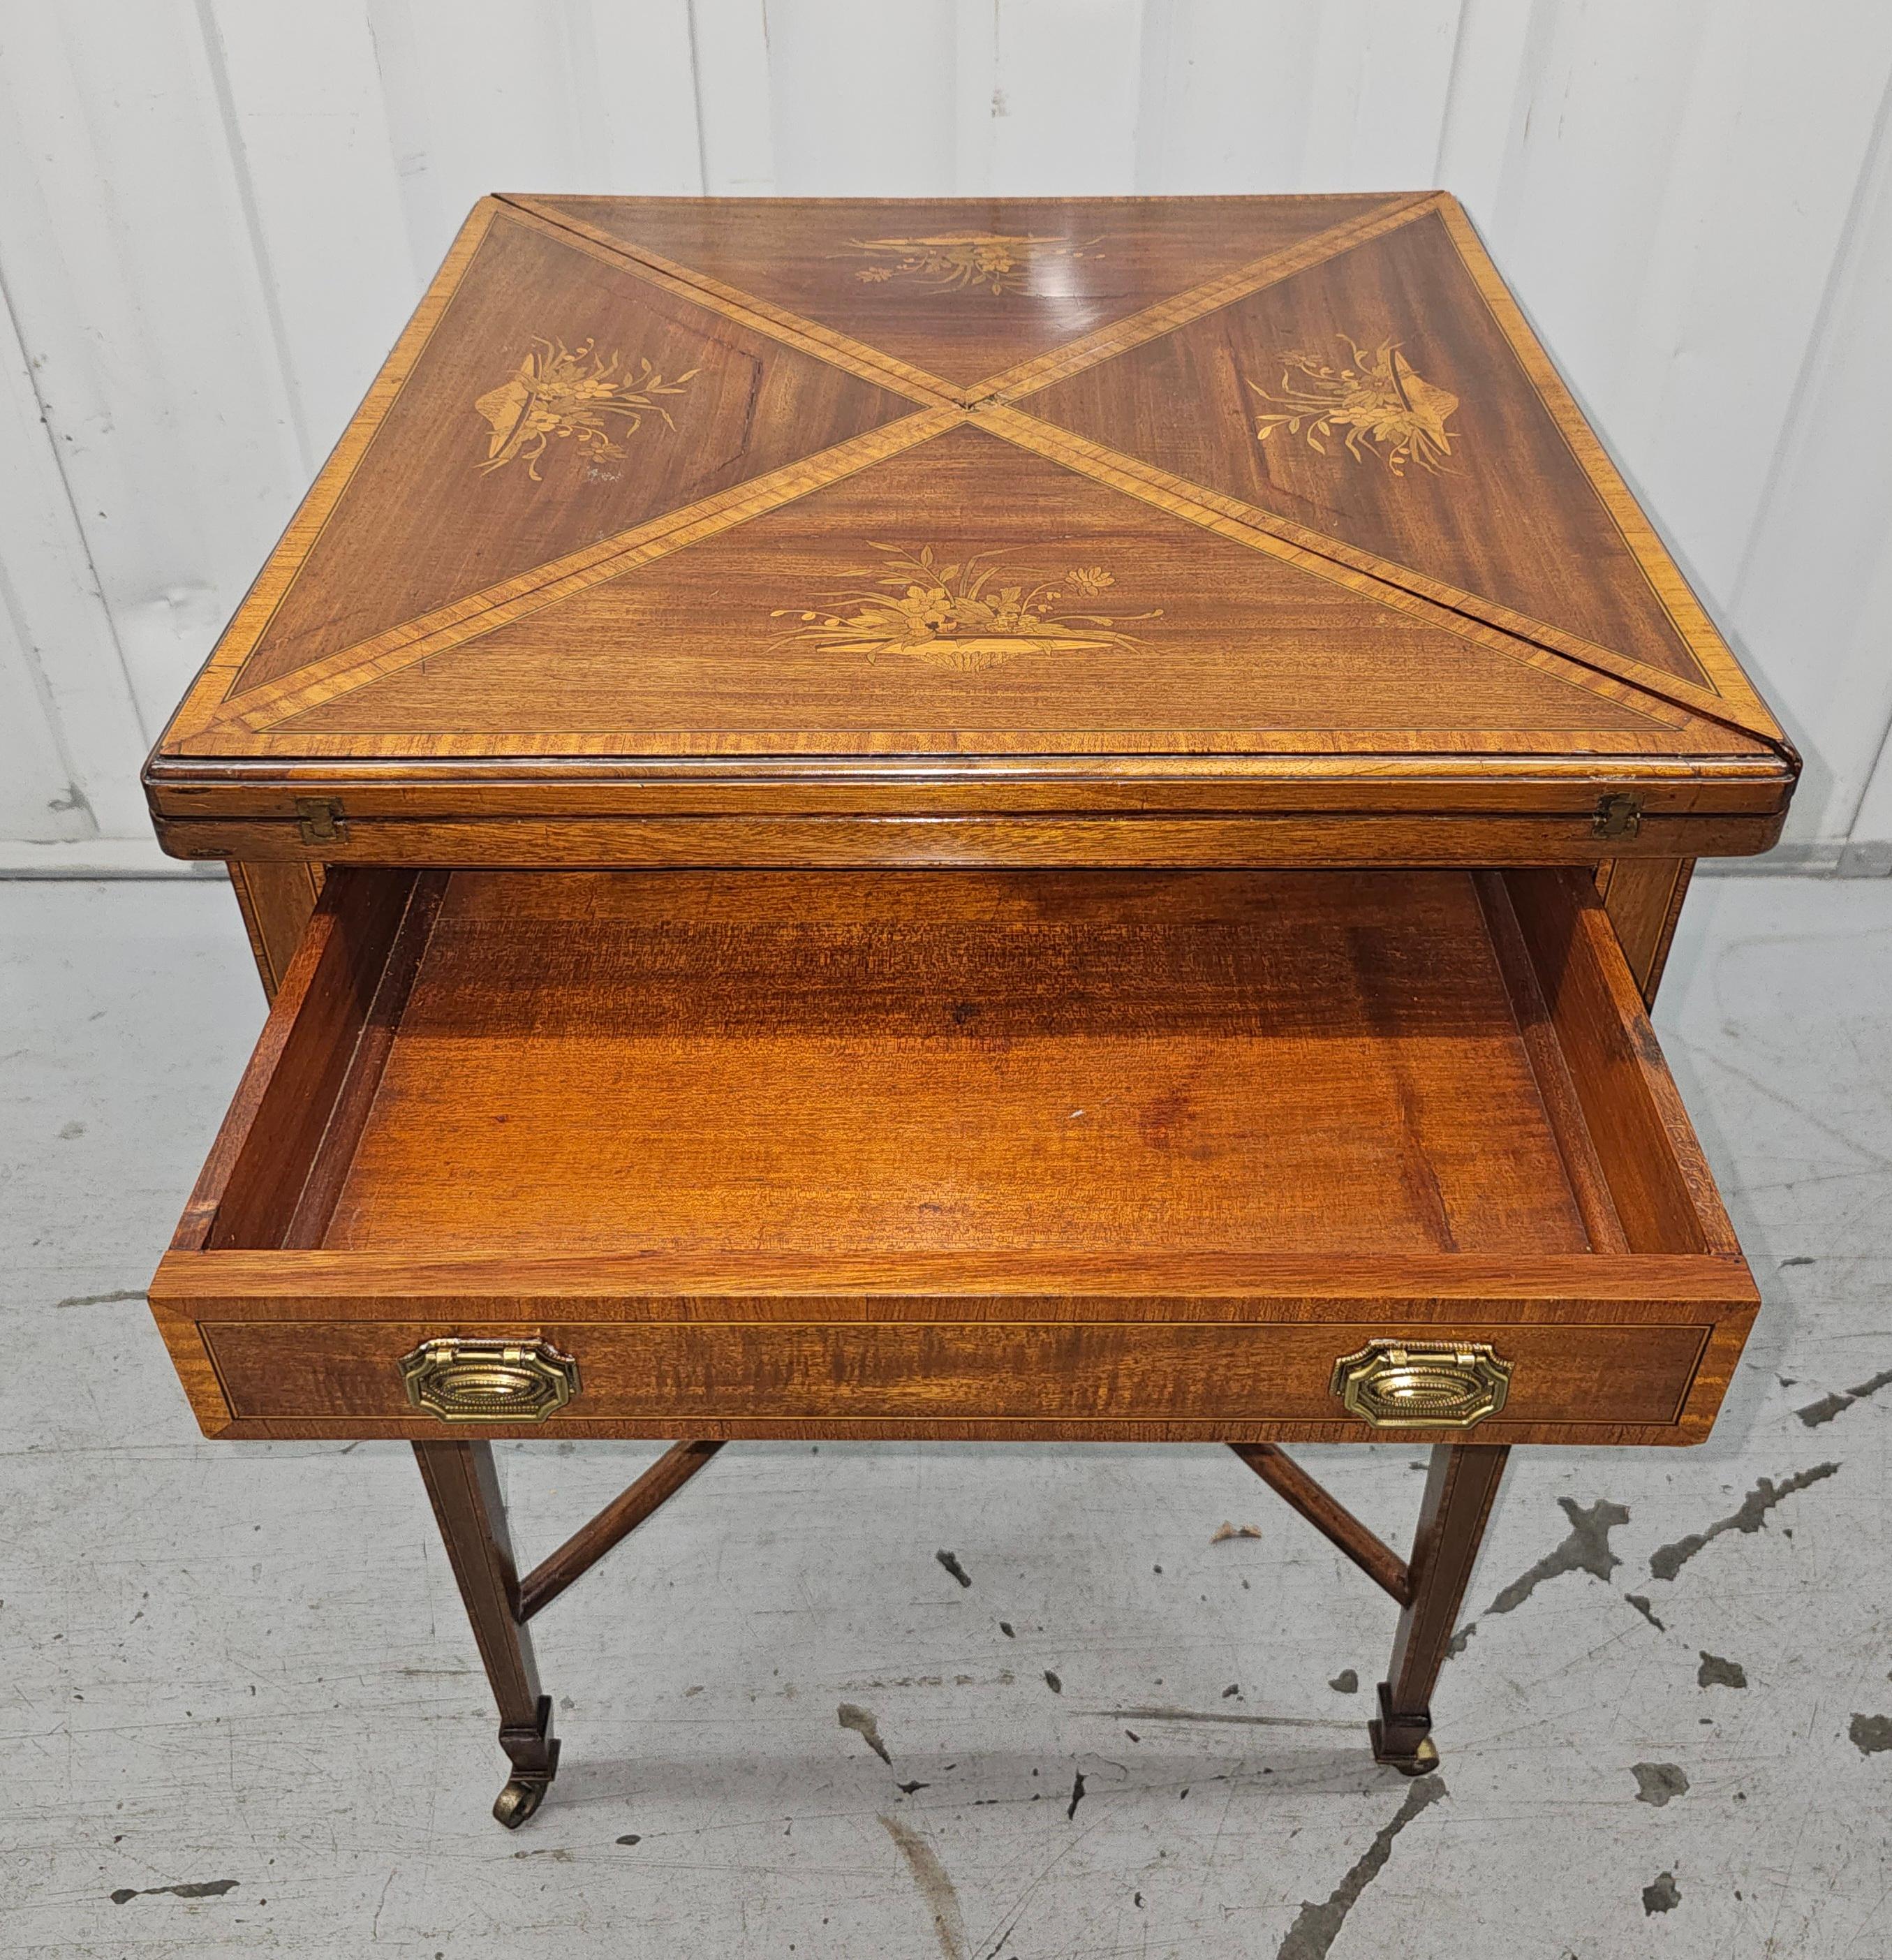 19th C. Edwardian Mahogany Inlaid Marquetry Handkerchief Fold-Top Games Table In Good Condition For Sale In Germantown, MD